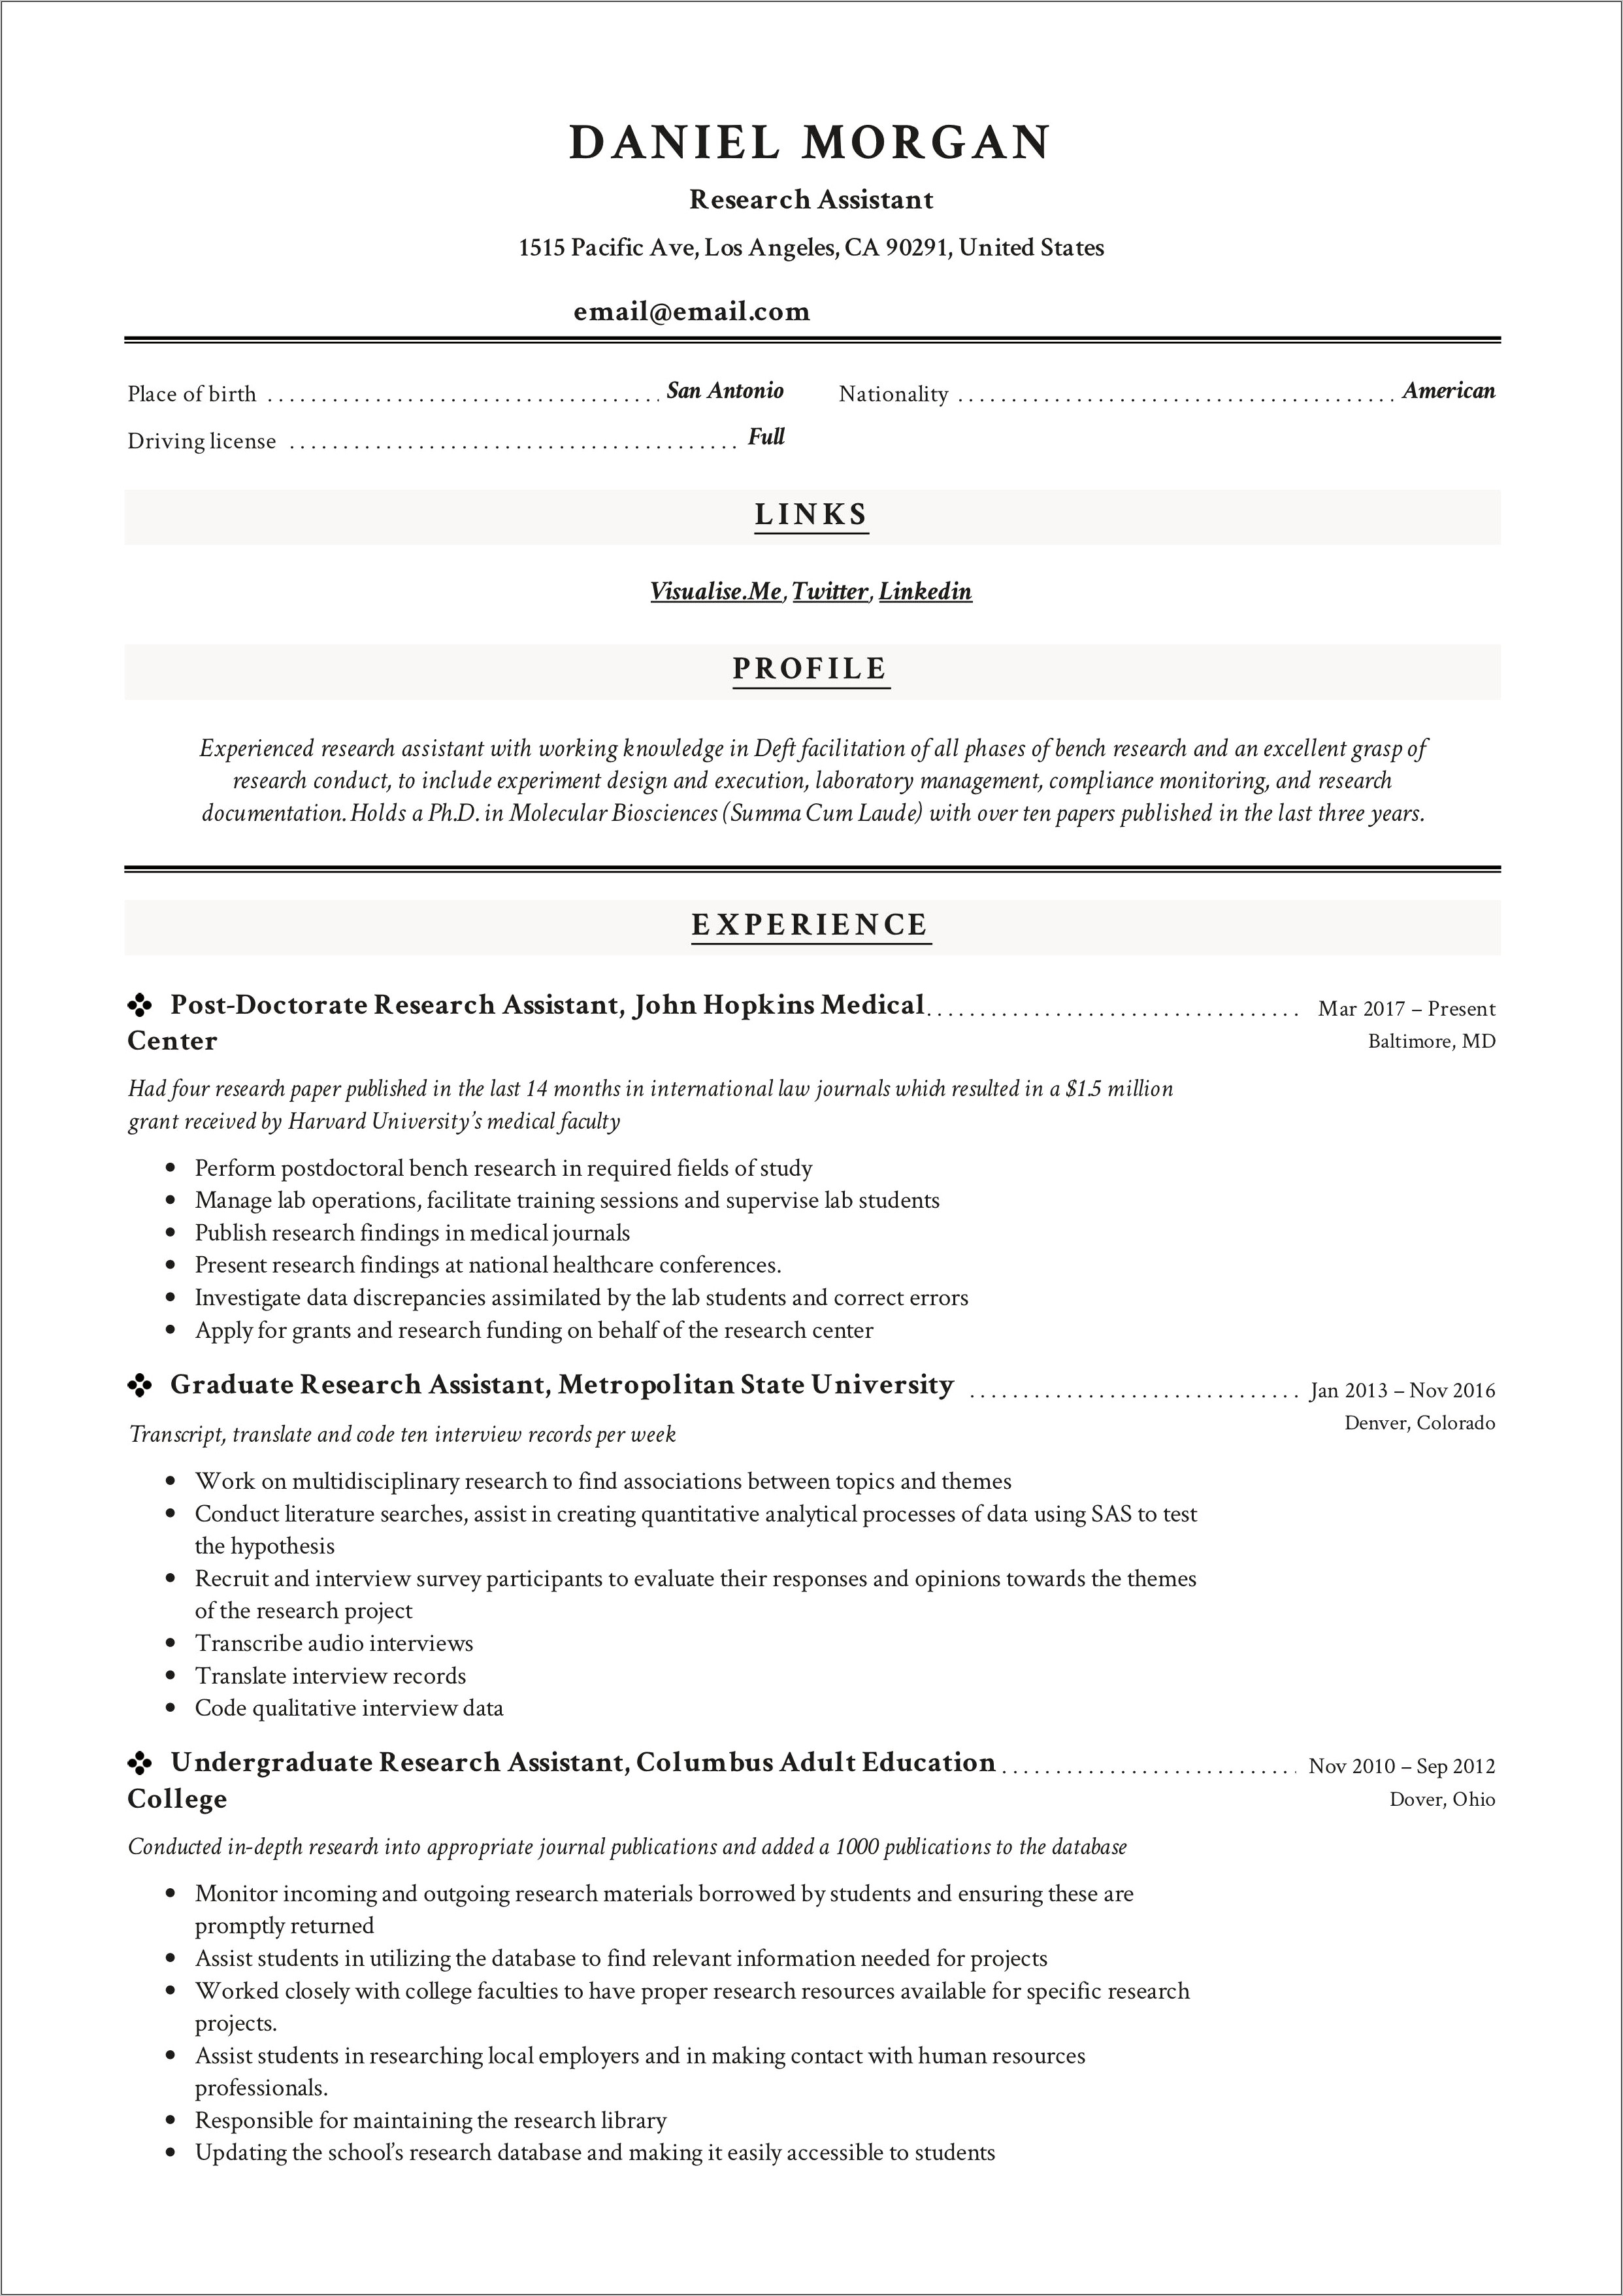 Listing Clinical Trial Experience On Resume